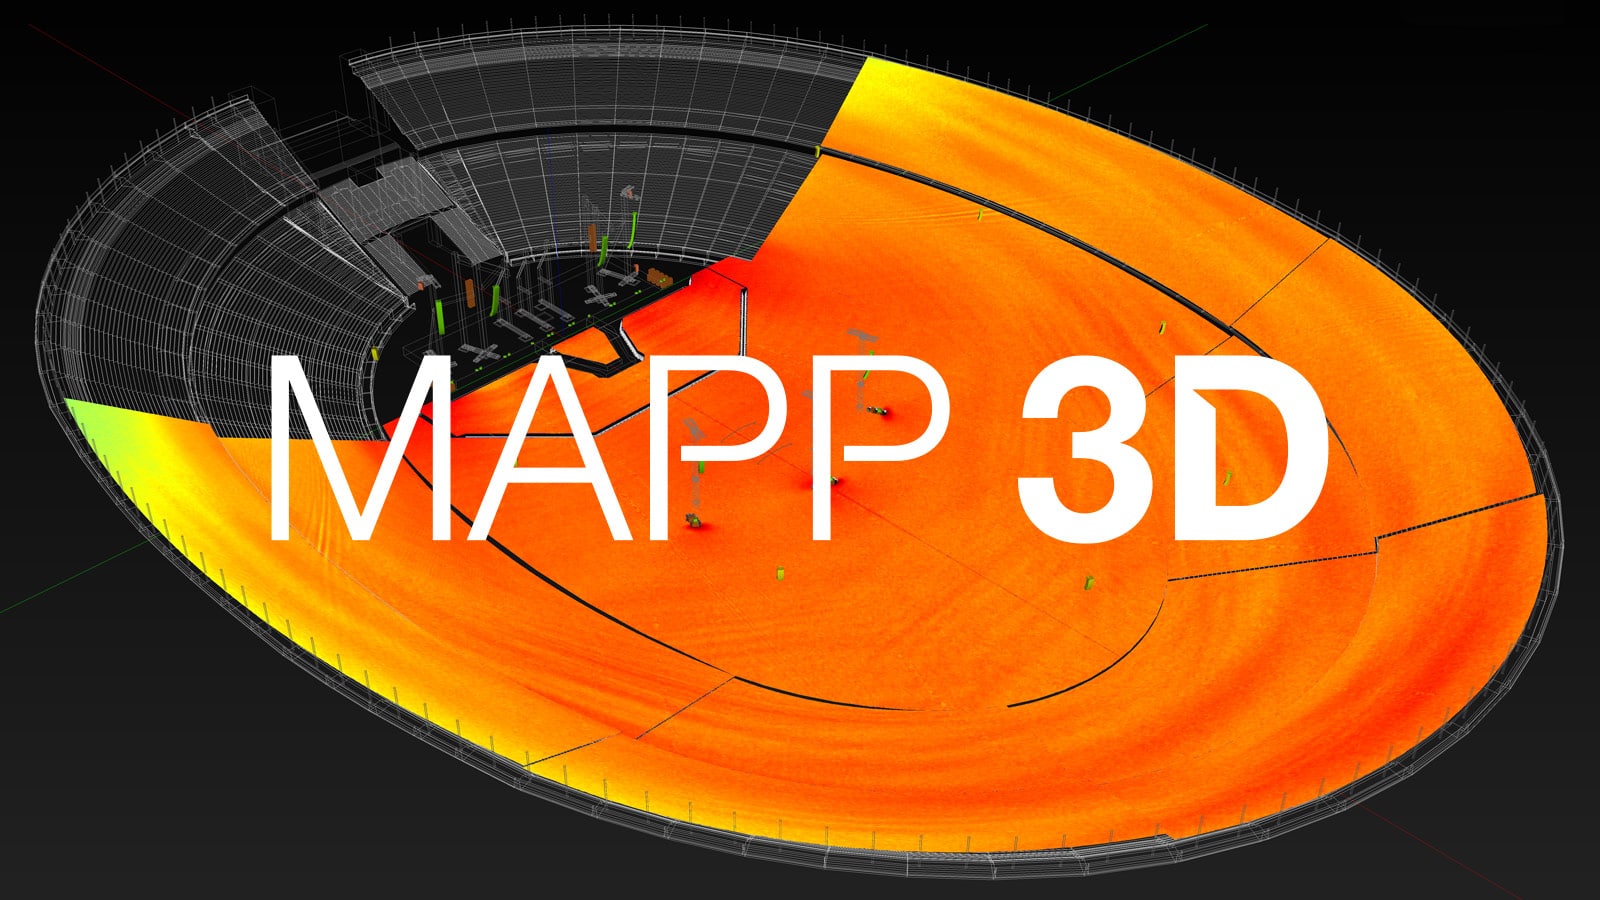 MAPP 3D system design and prediction tool